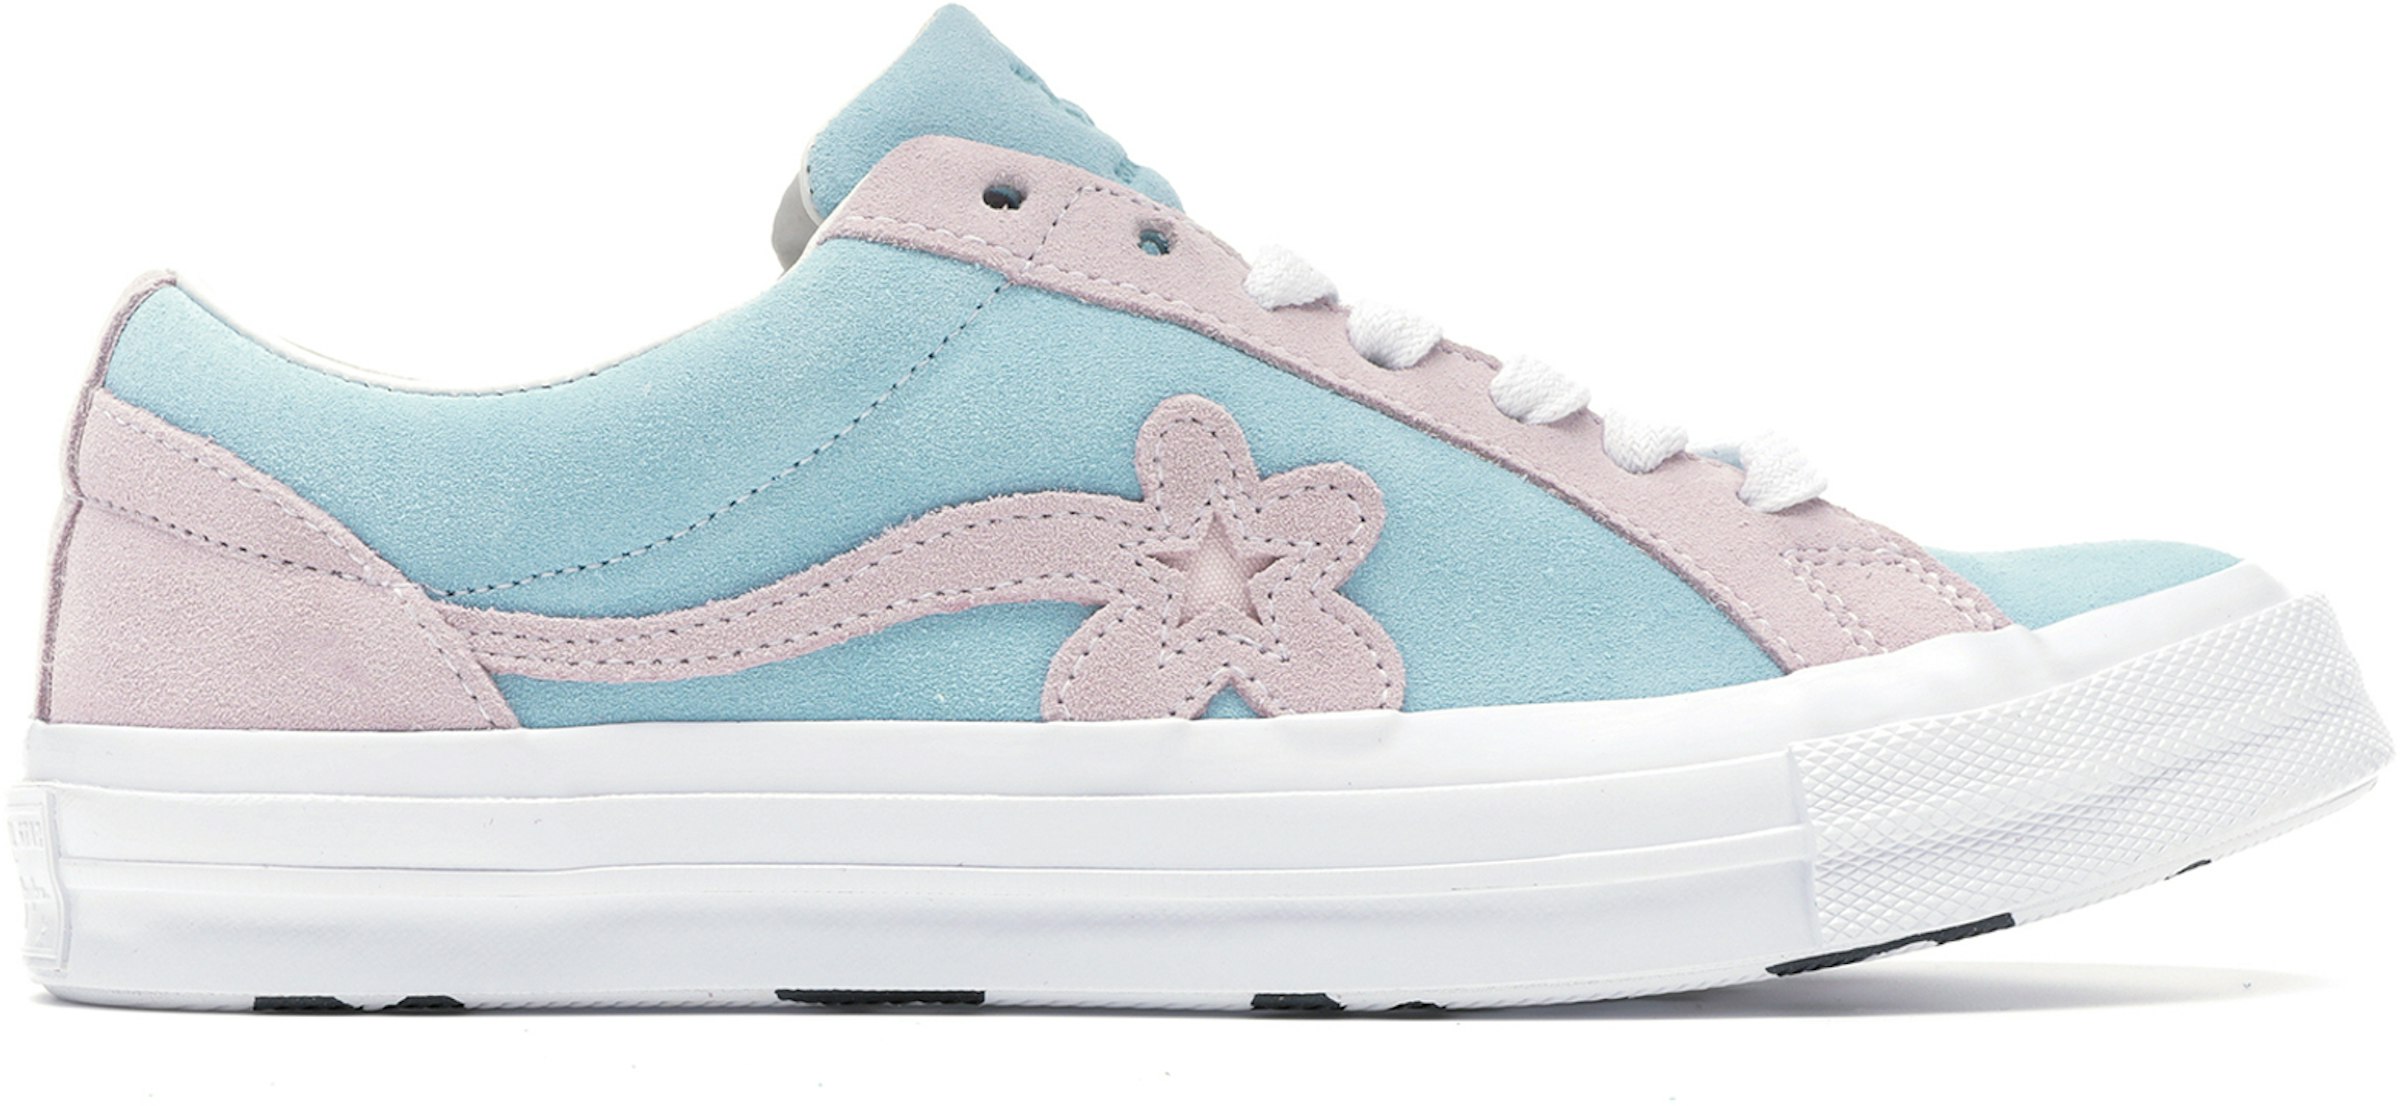 Converse One Star Ox Tyler the Creator Golf Le Light Blue Pink Men's - 162127C - US